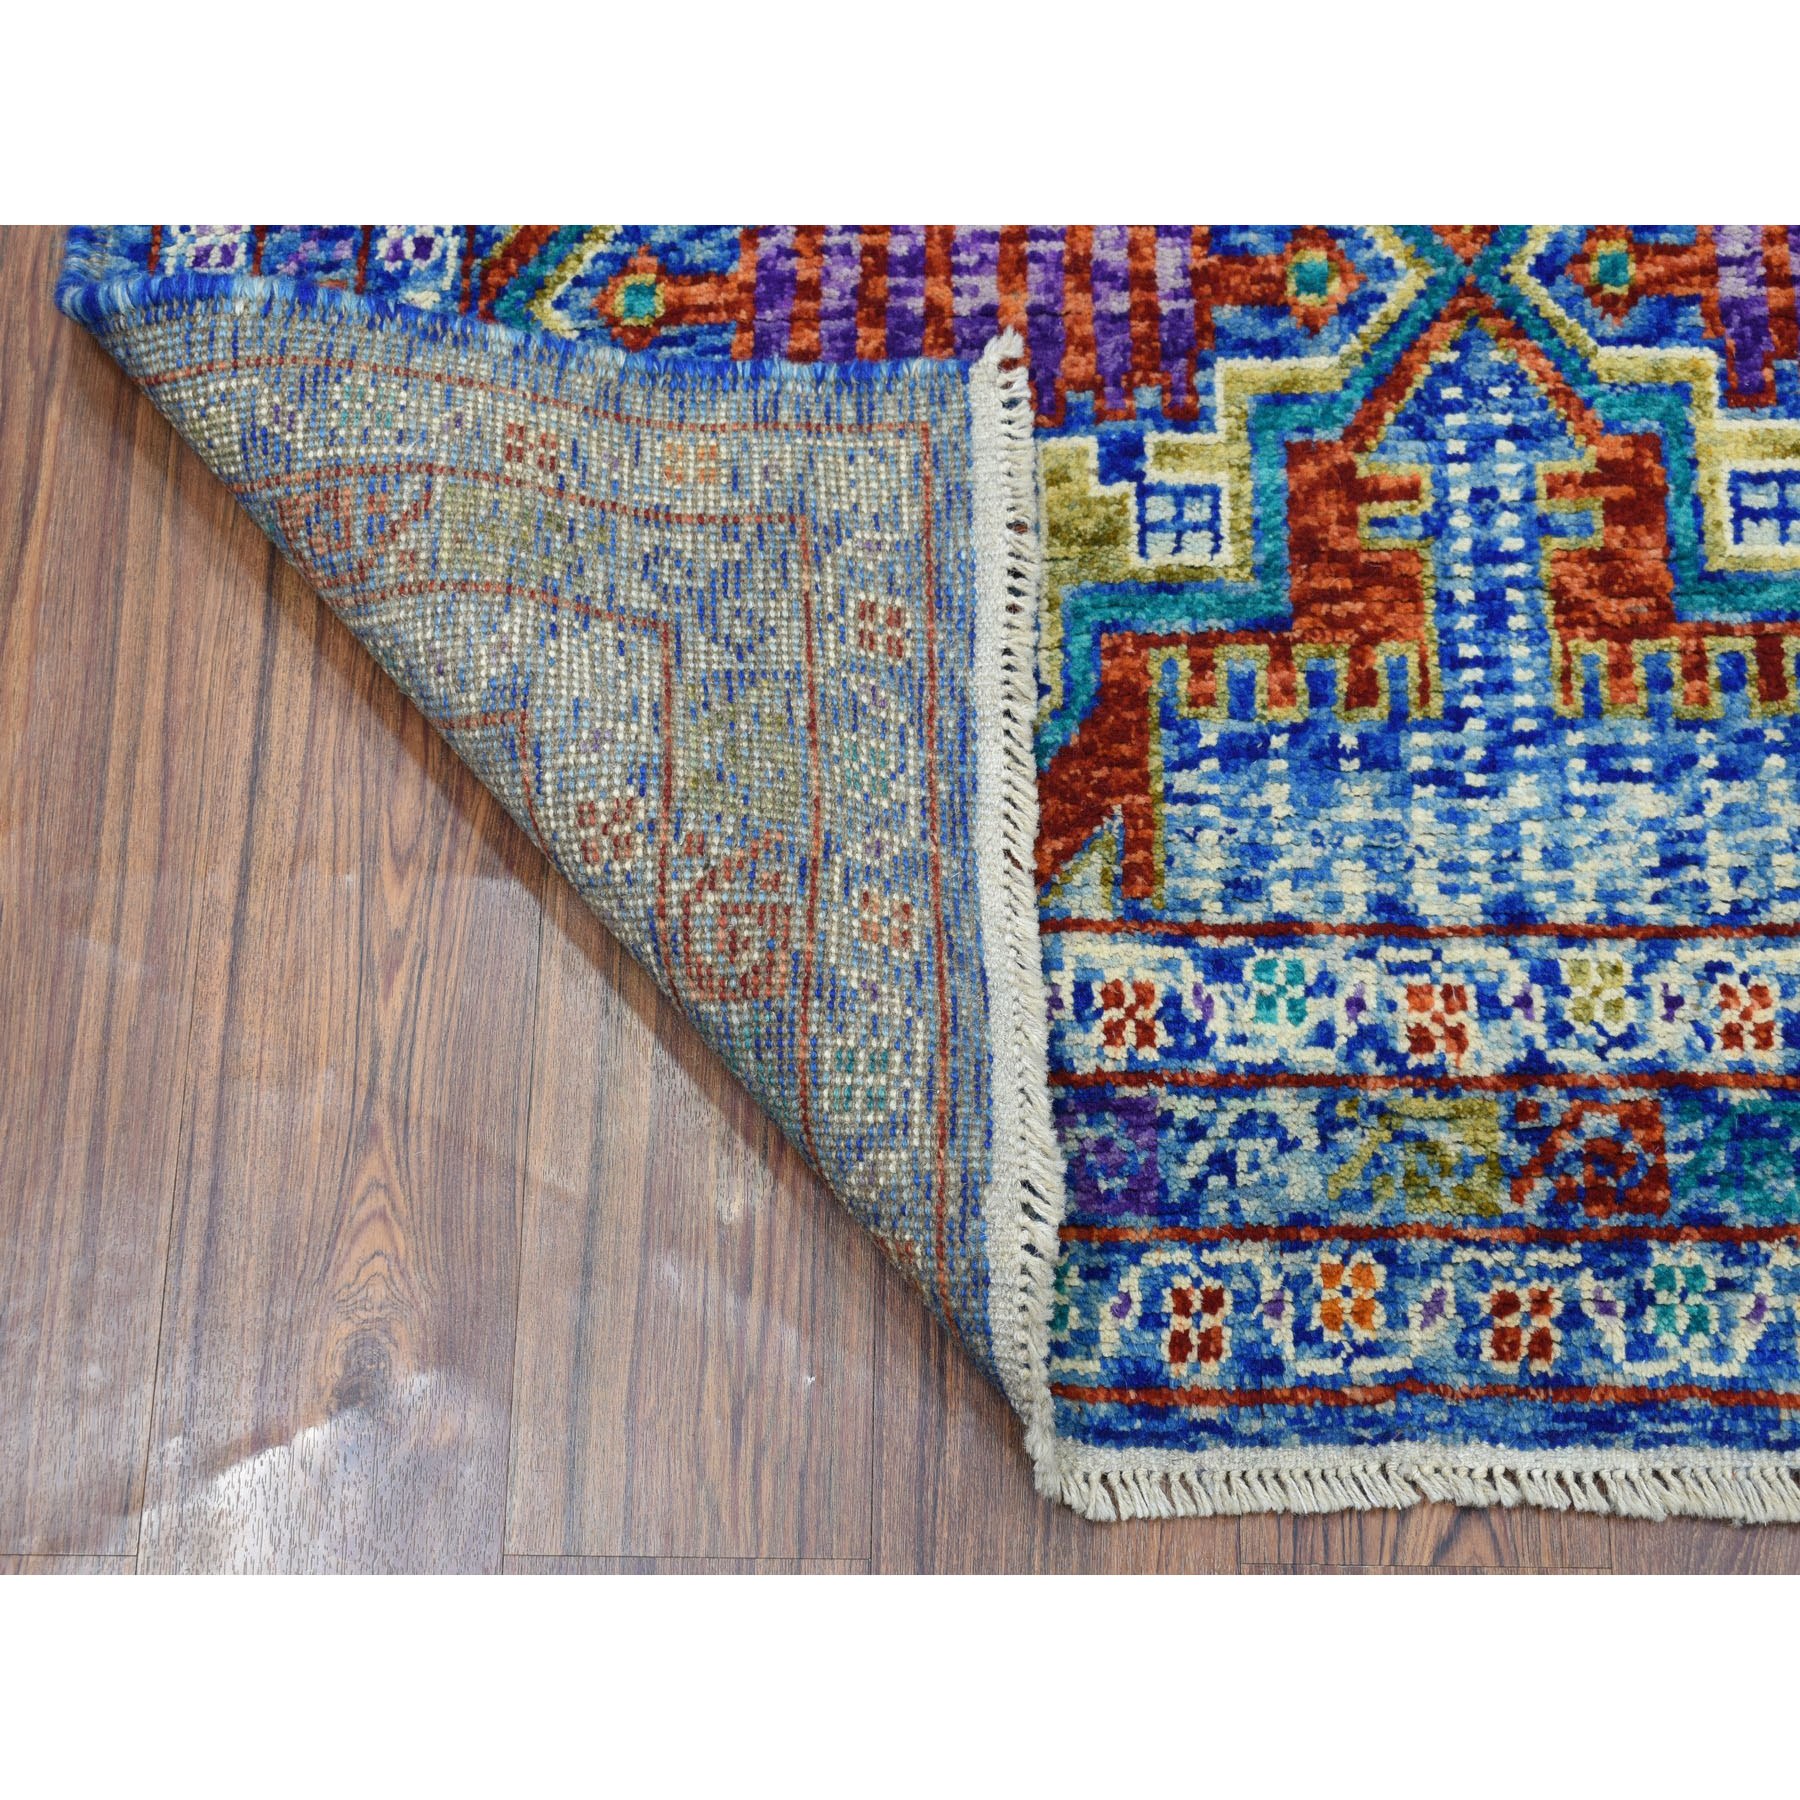 6-1 x8-1  Blue Tribal Design Colorful Afghan Baluch Hand Knotted Pure Wool Oriental Rug 